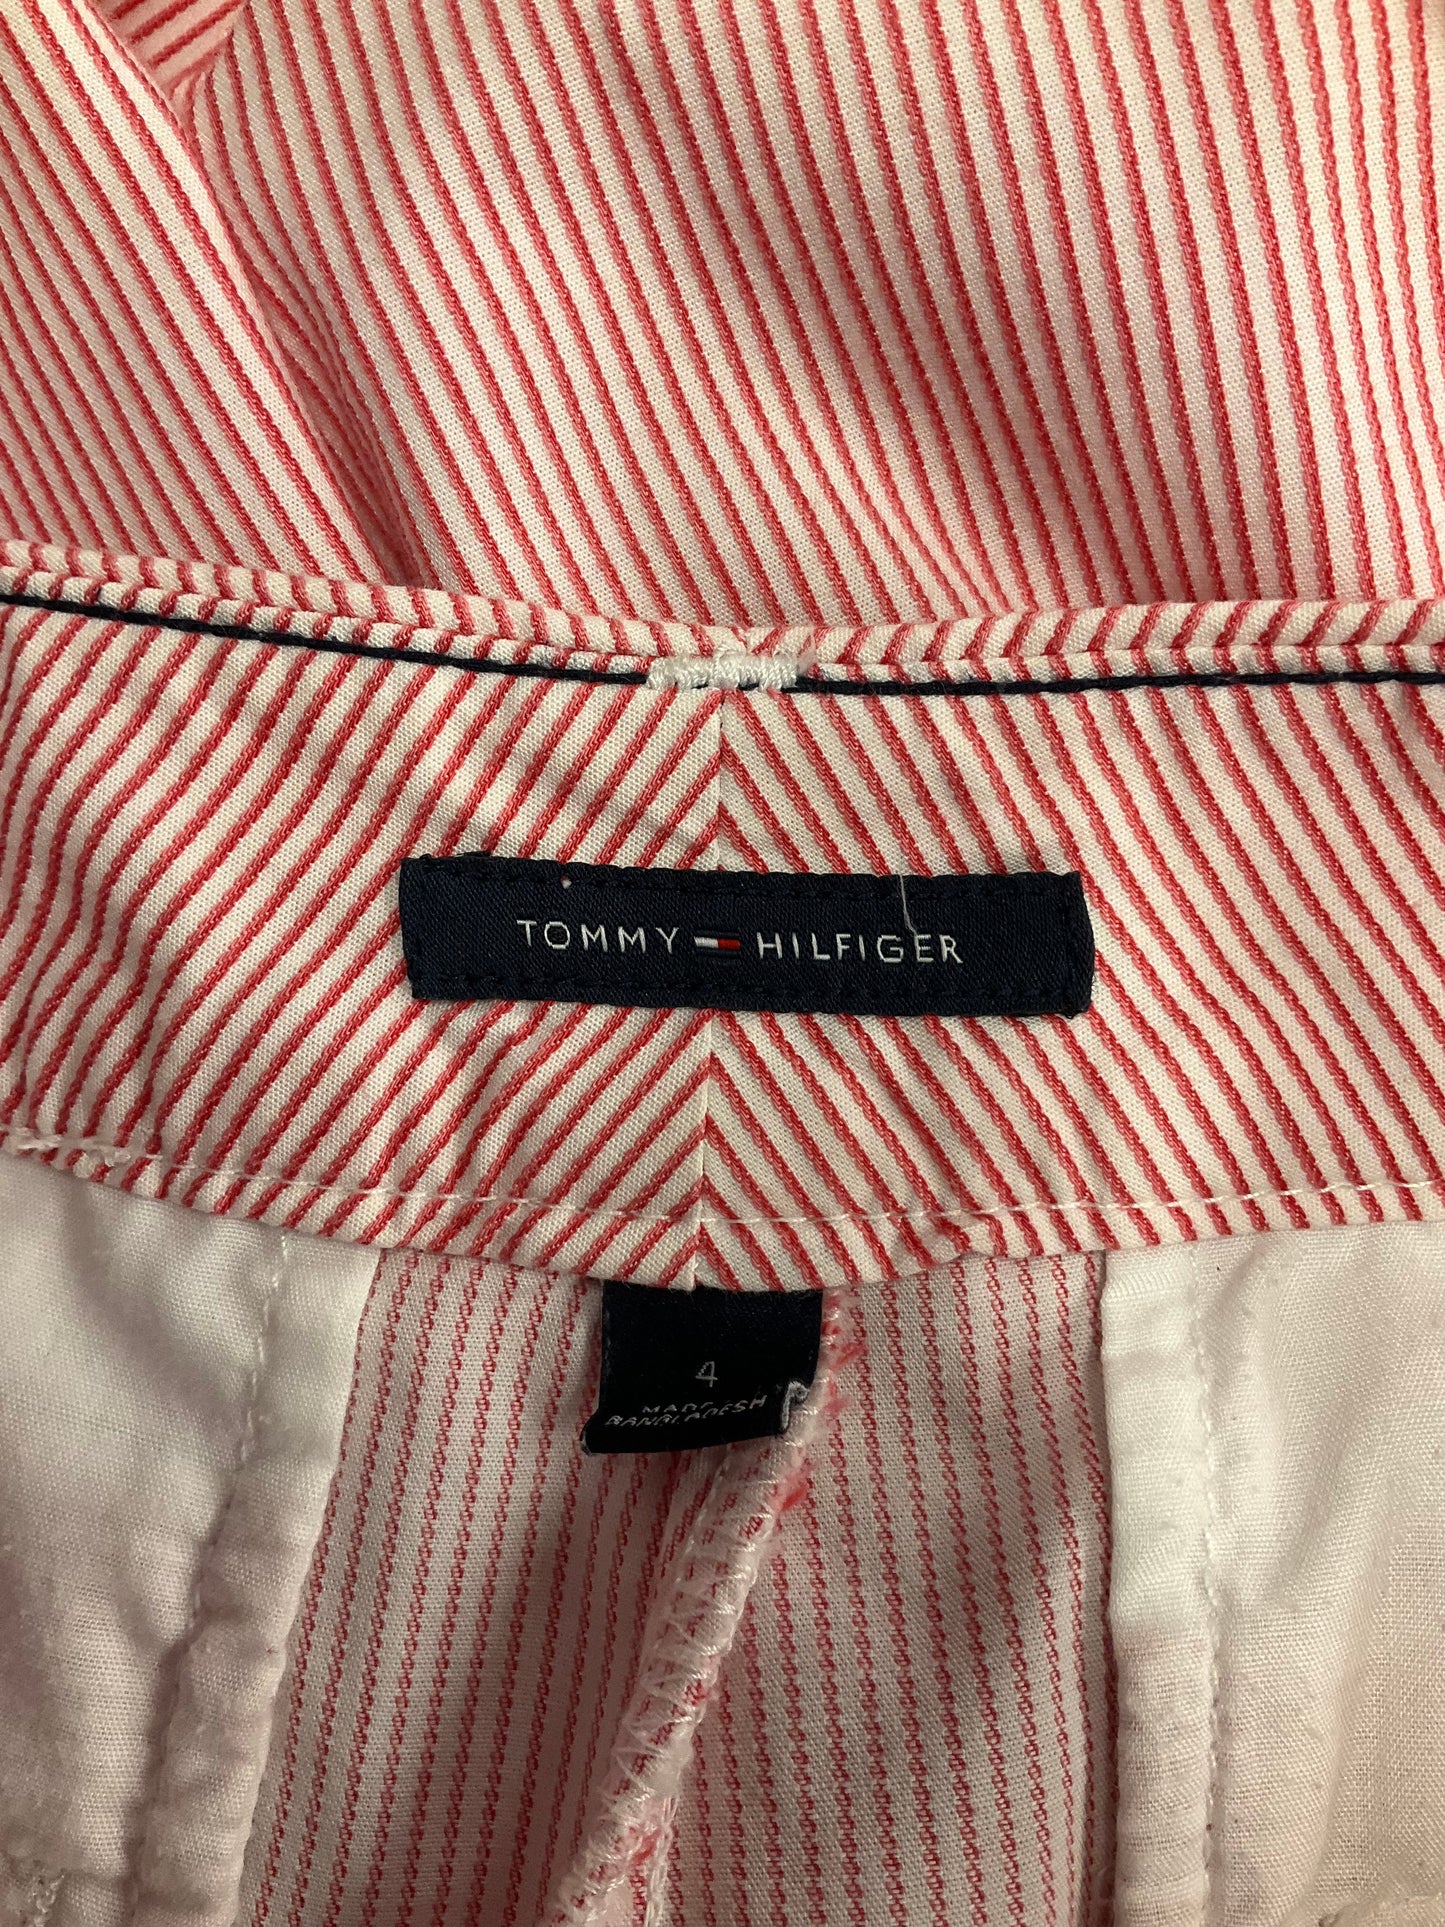 Red & White Shorts Tommy Hilfiger, Size 4